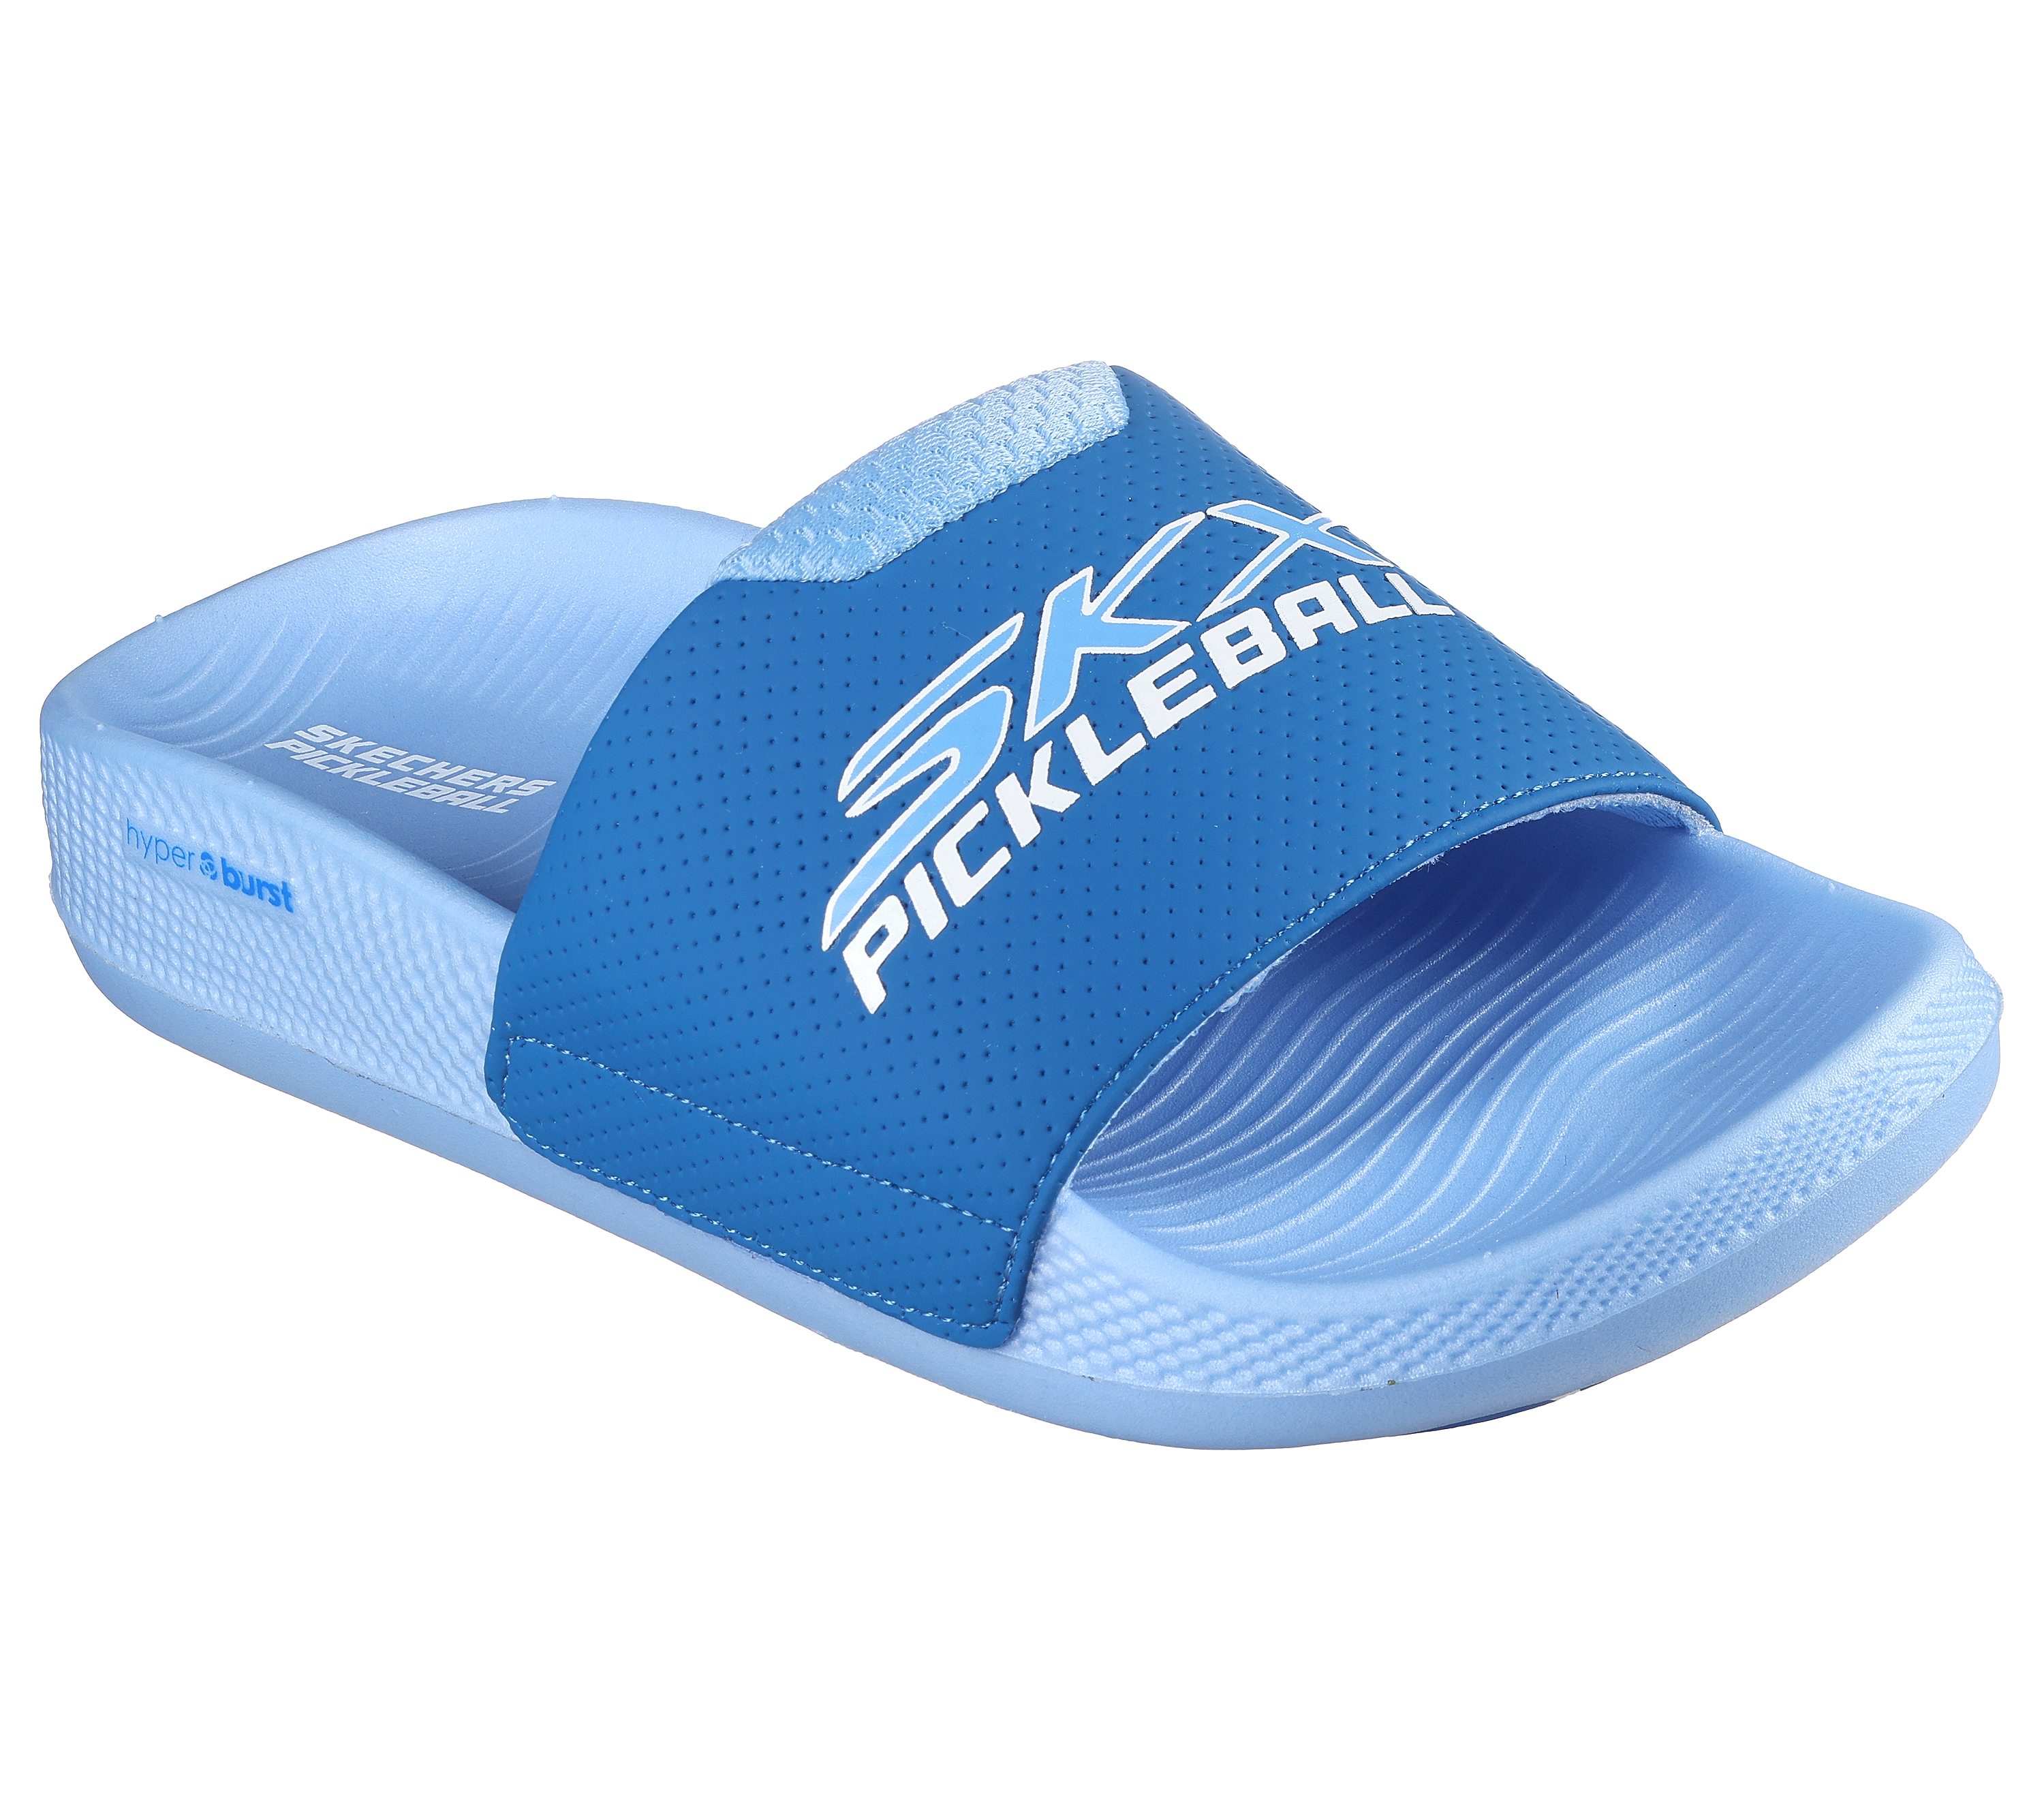 Give yourself the post-run recovery you deserve with Skechers Hyper Slide  sandals — Featuring a HYPER BURST®️ cushioned midsole and